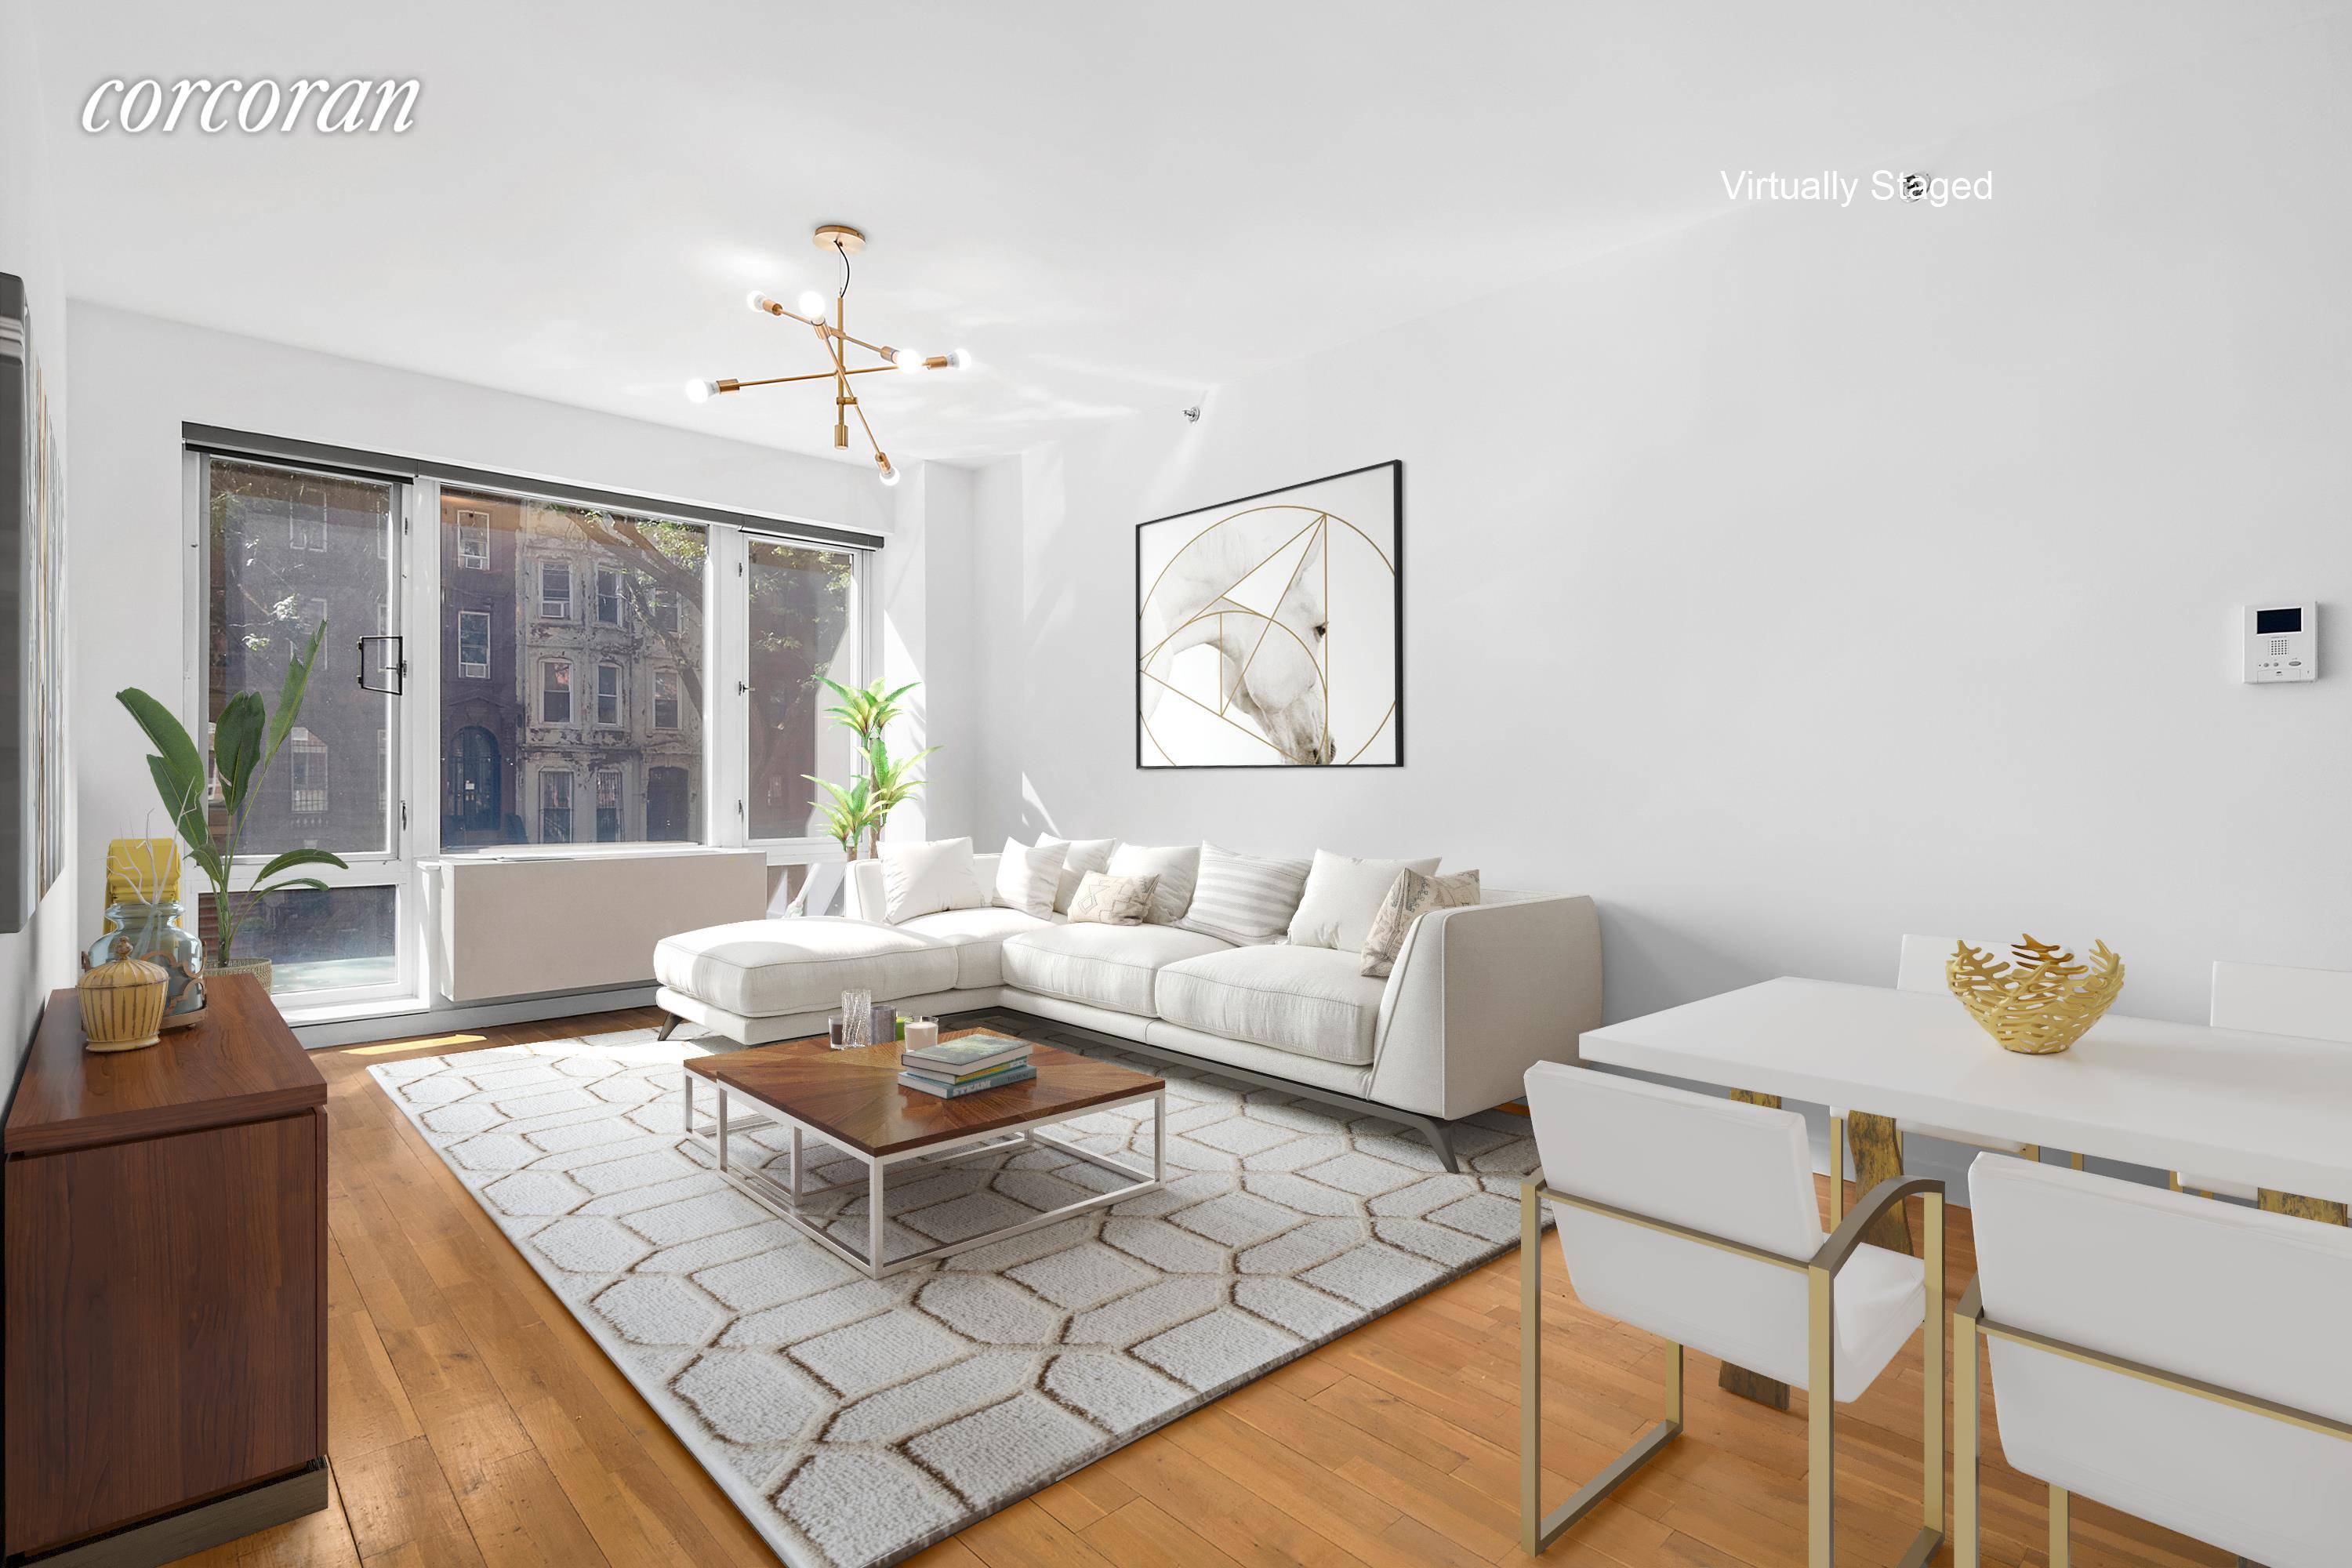 Situated at the crossroads of Clinton Hill, Fort Greene, and Prospect Heights, the Isabella at 545 Washington Avenue offers modern luxury living amidst historic Clinton Hill brownstones.